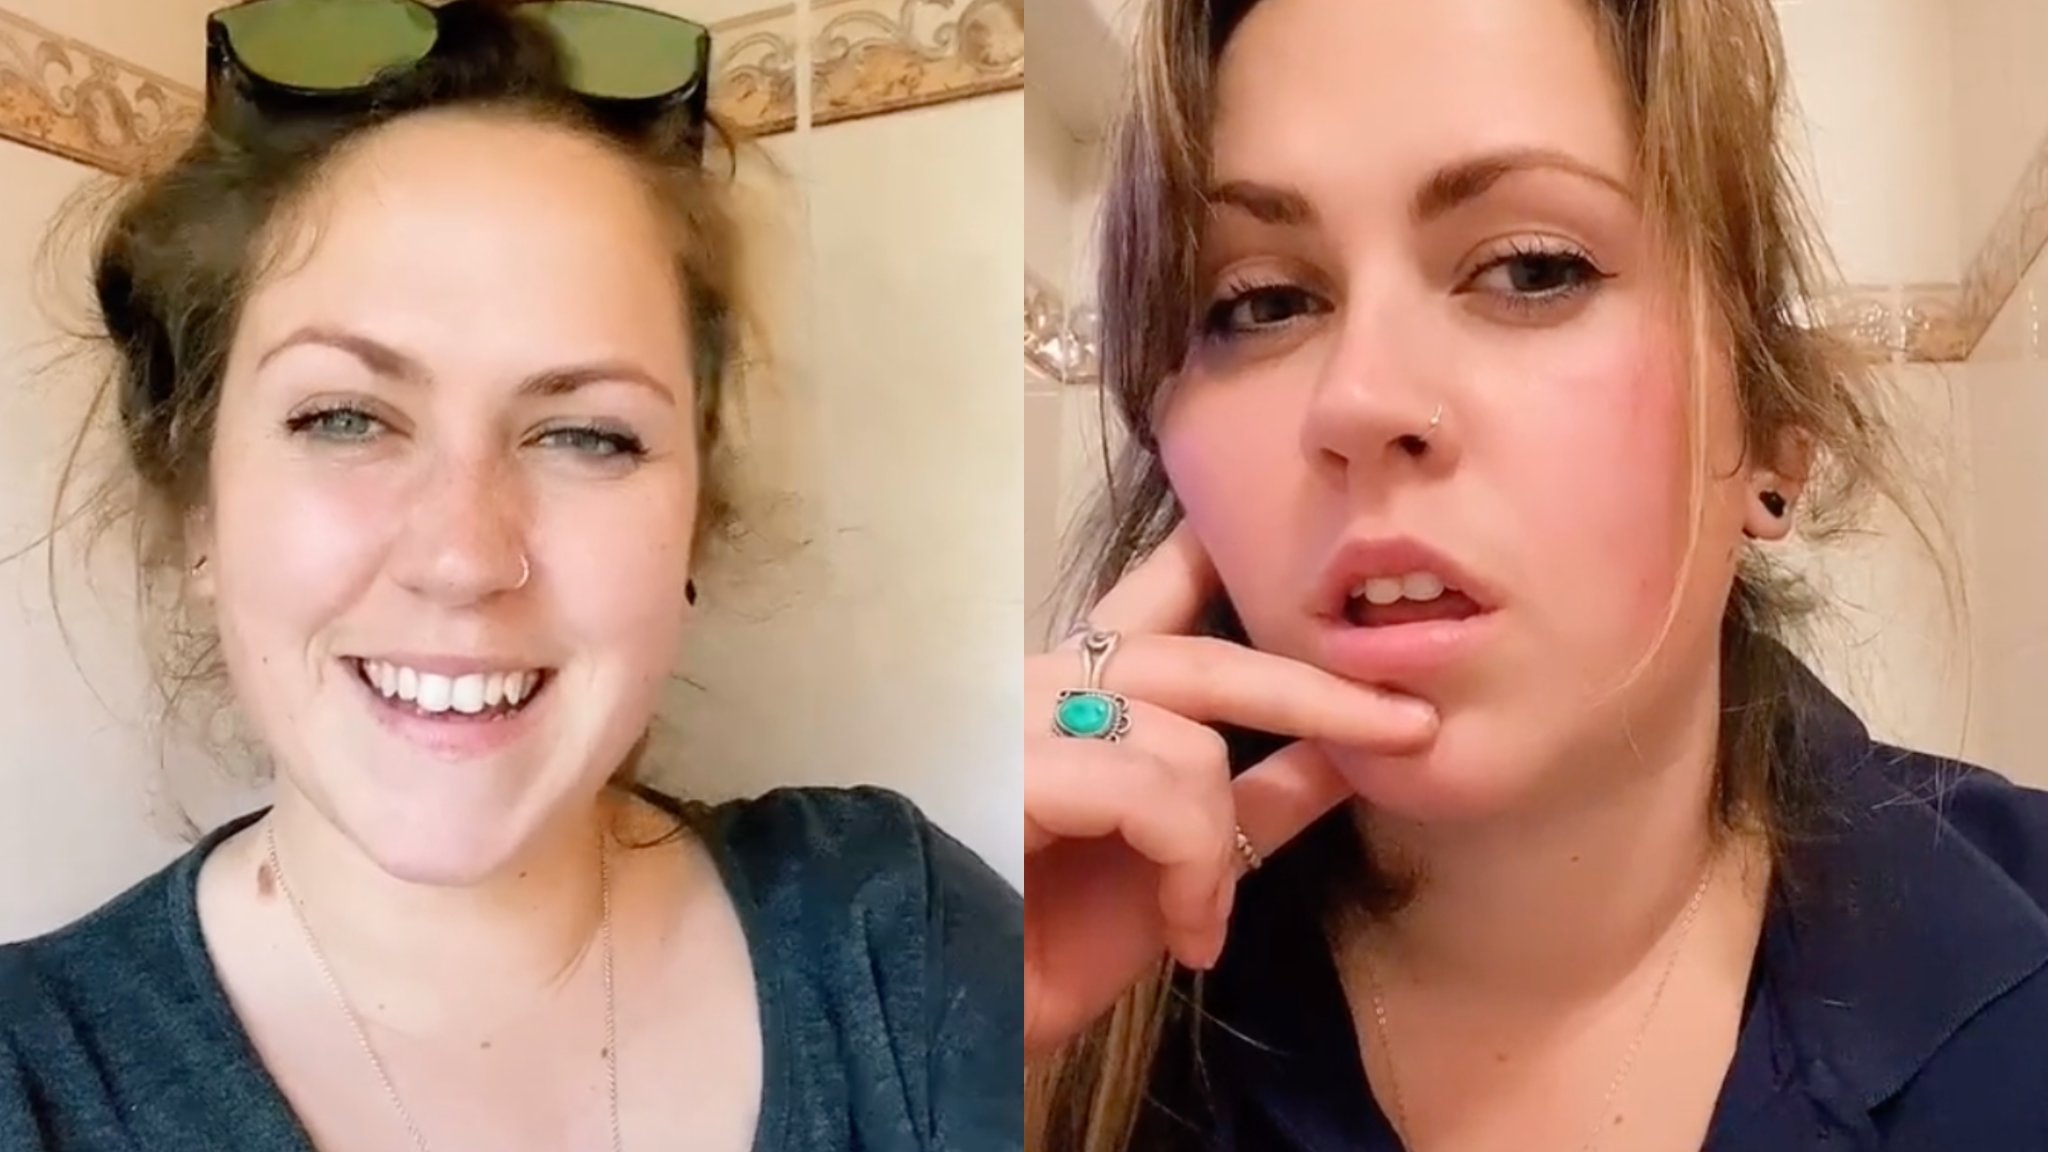 Woman on TikTok Reveals Her 'Vagina Hack' for Curing Constipation & It's Actually Legit